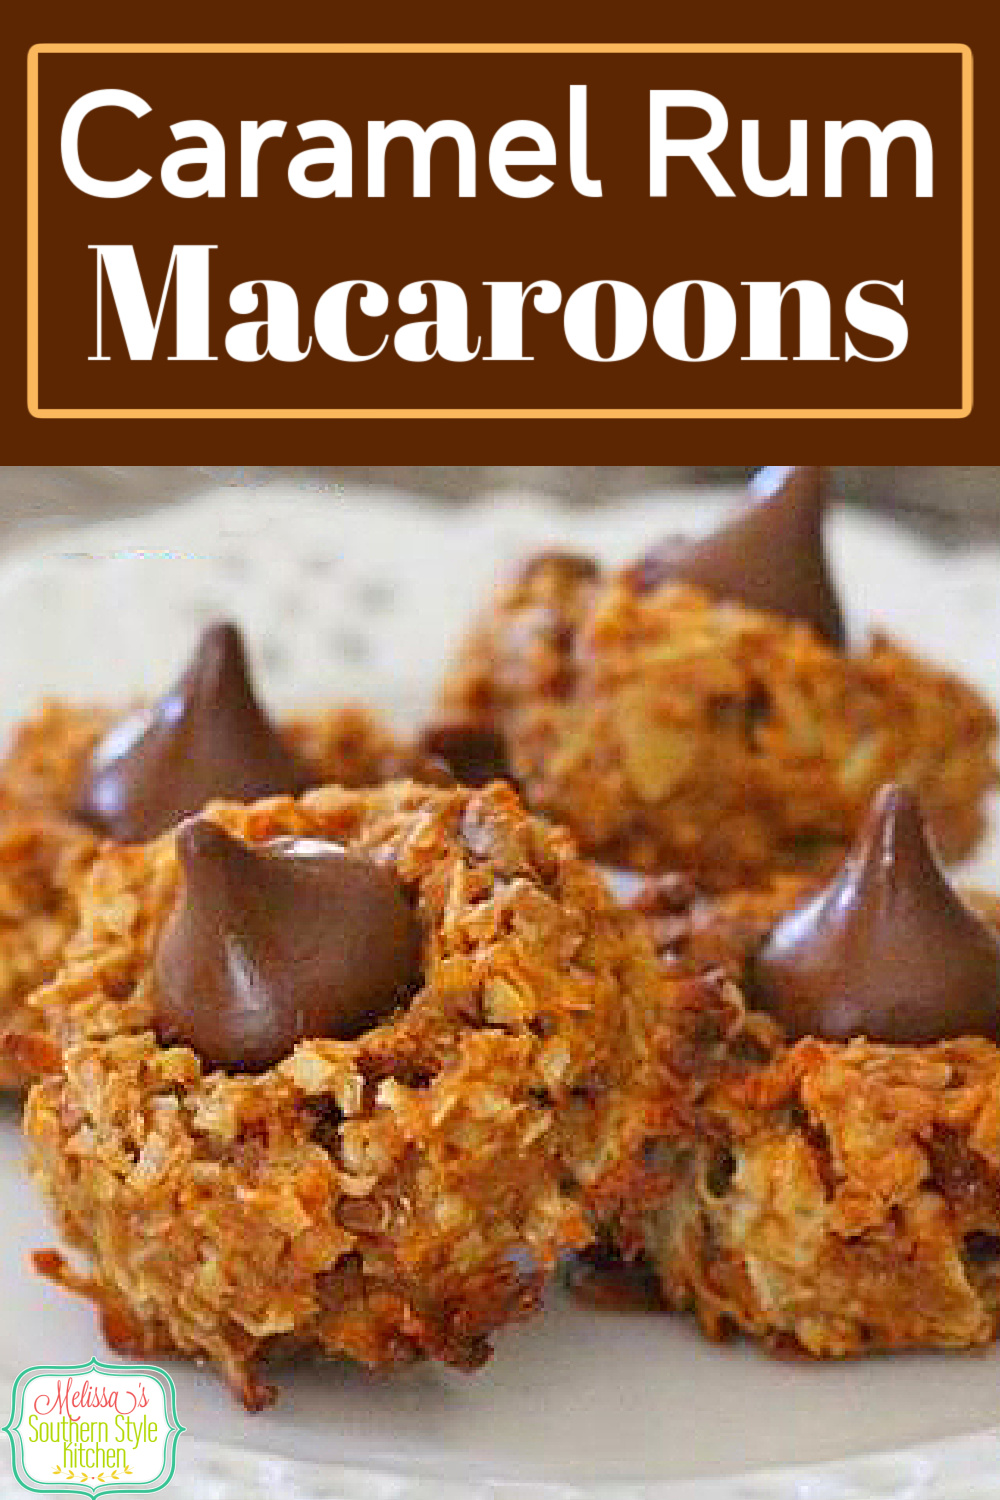 Caramel Rum Macaroon Cookies will make a stellar addition to your cookie menu #macaroons #macarooncookies #caramelrummacaroons #dulcedeleche #macarooncookies #holidaybaking #holidaycookies #cookierecipes #chocolate #coconutcookies #southernfood #southernrecipes #christmascookies via @melissasssk